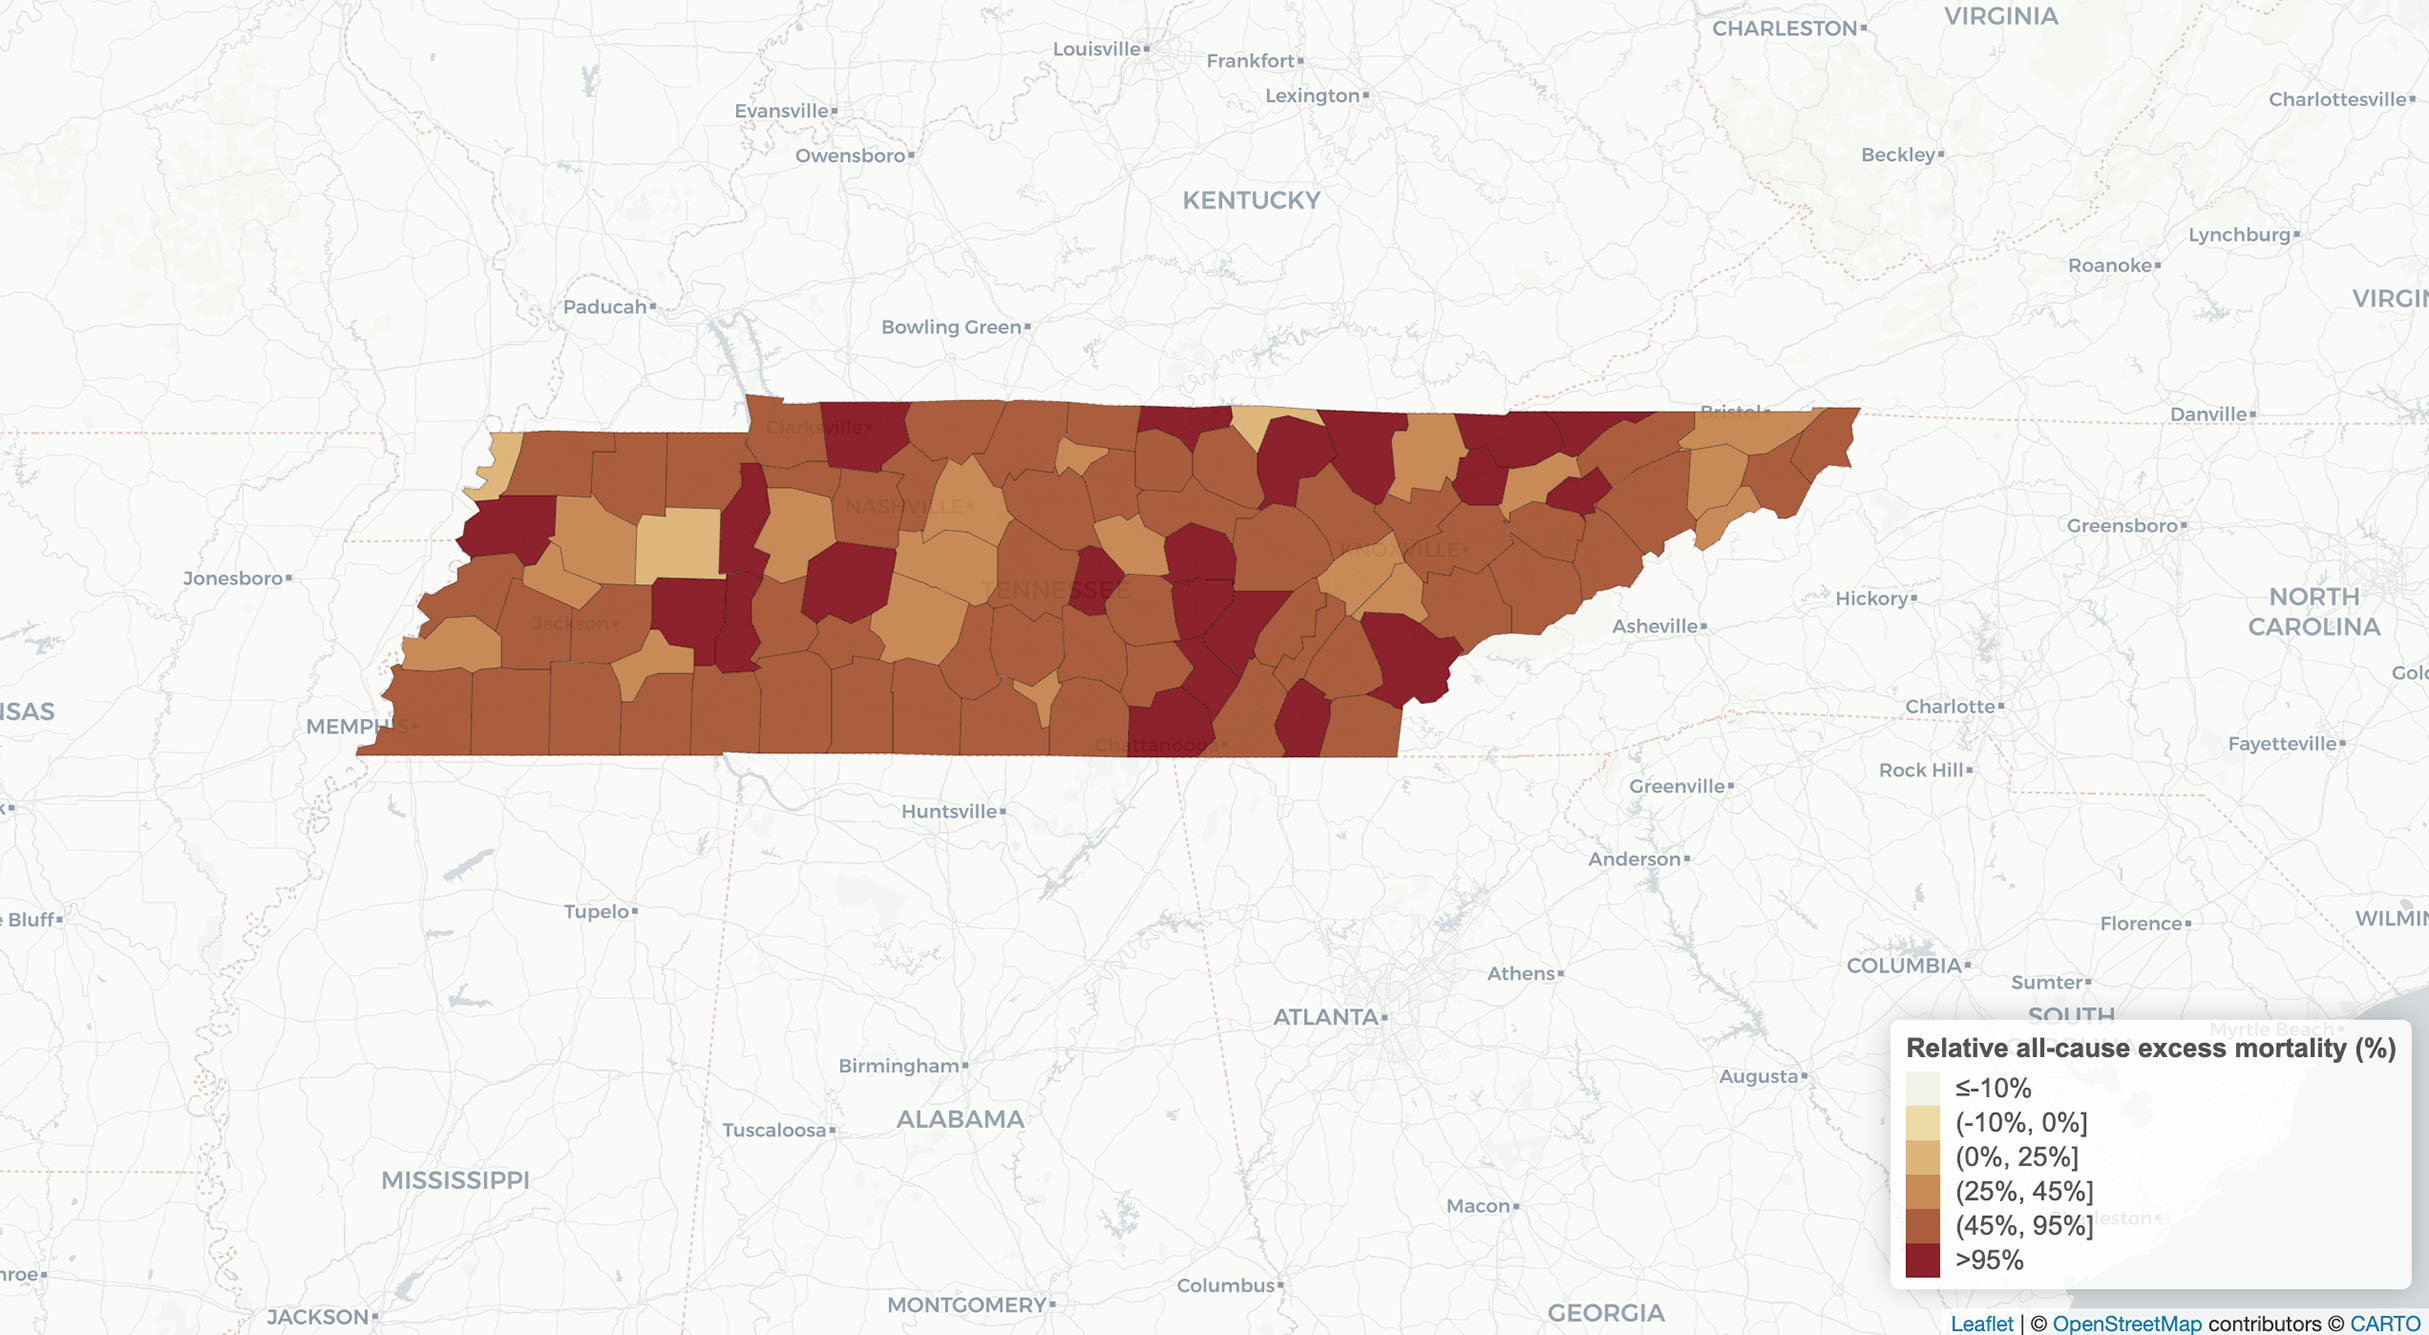 Image: Map of Tennessee that shows the county view in September 2021-the darker the color, the higher the mortality rate. Colors range from light yellow to dark red.